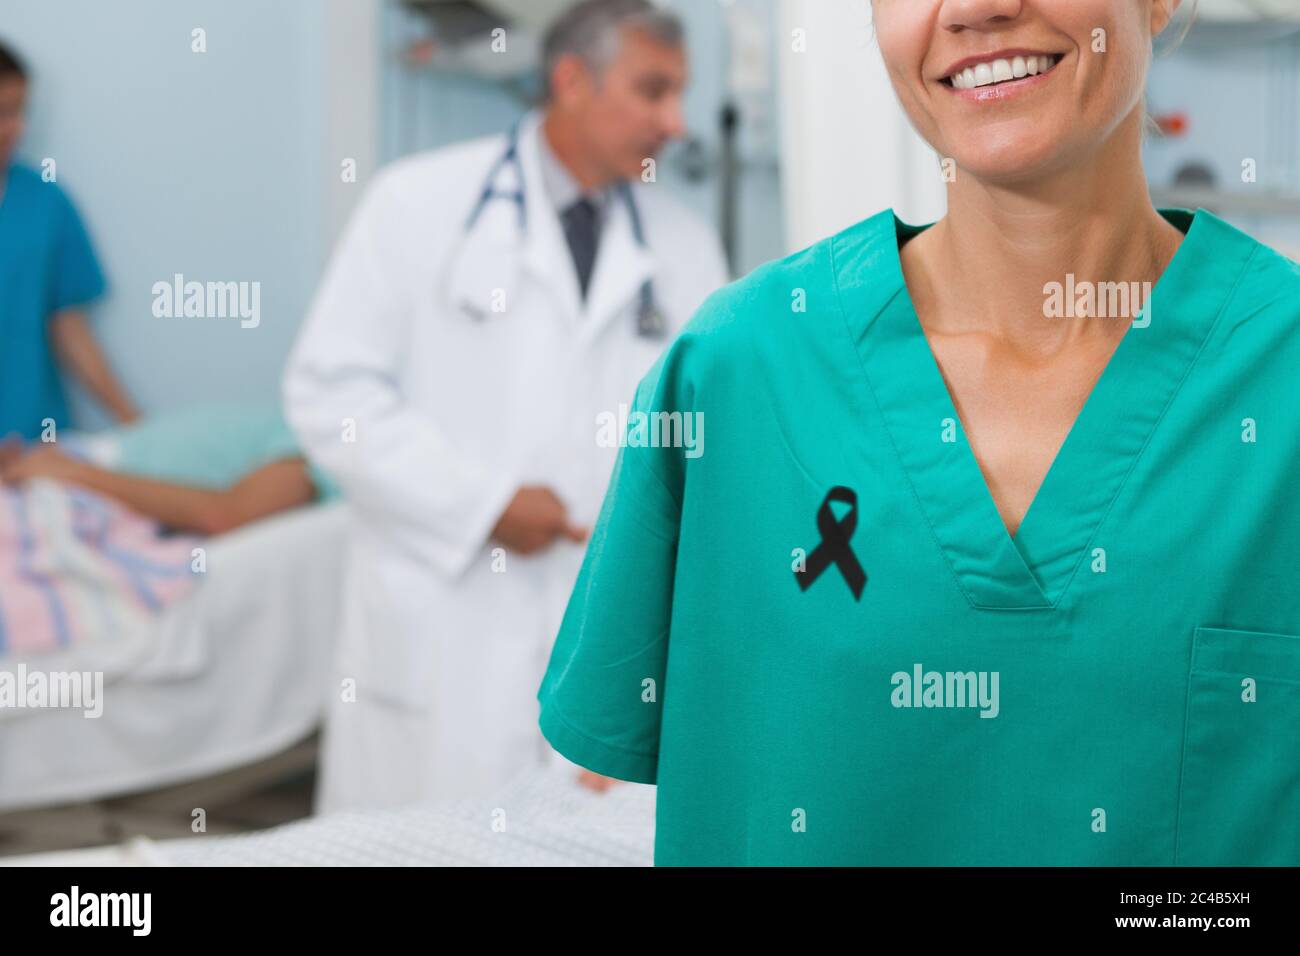 Mid section of lady nurse with black ribbon on robe smiling Stock Photo